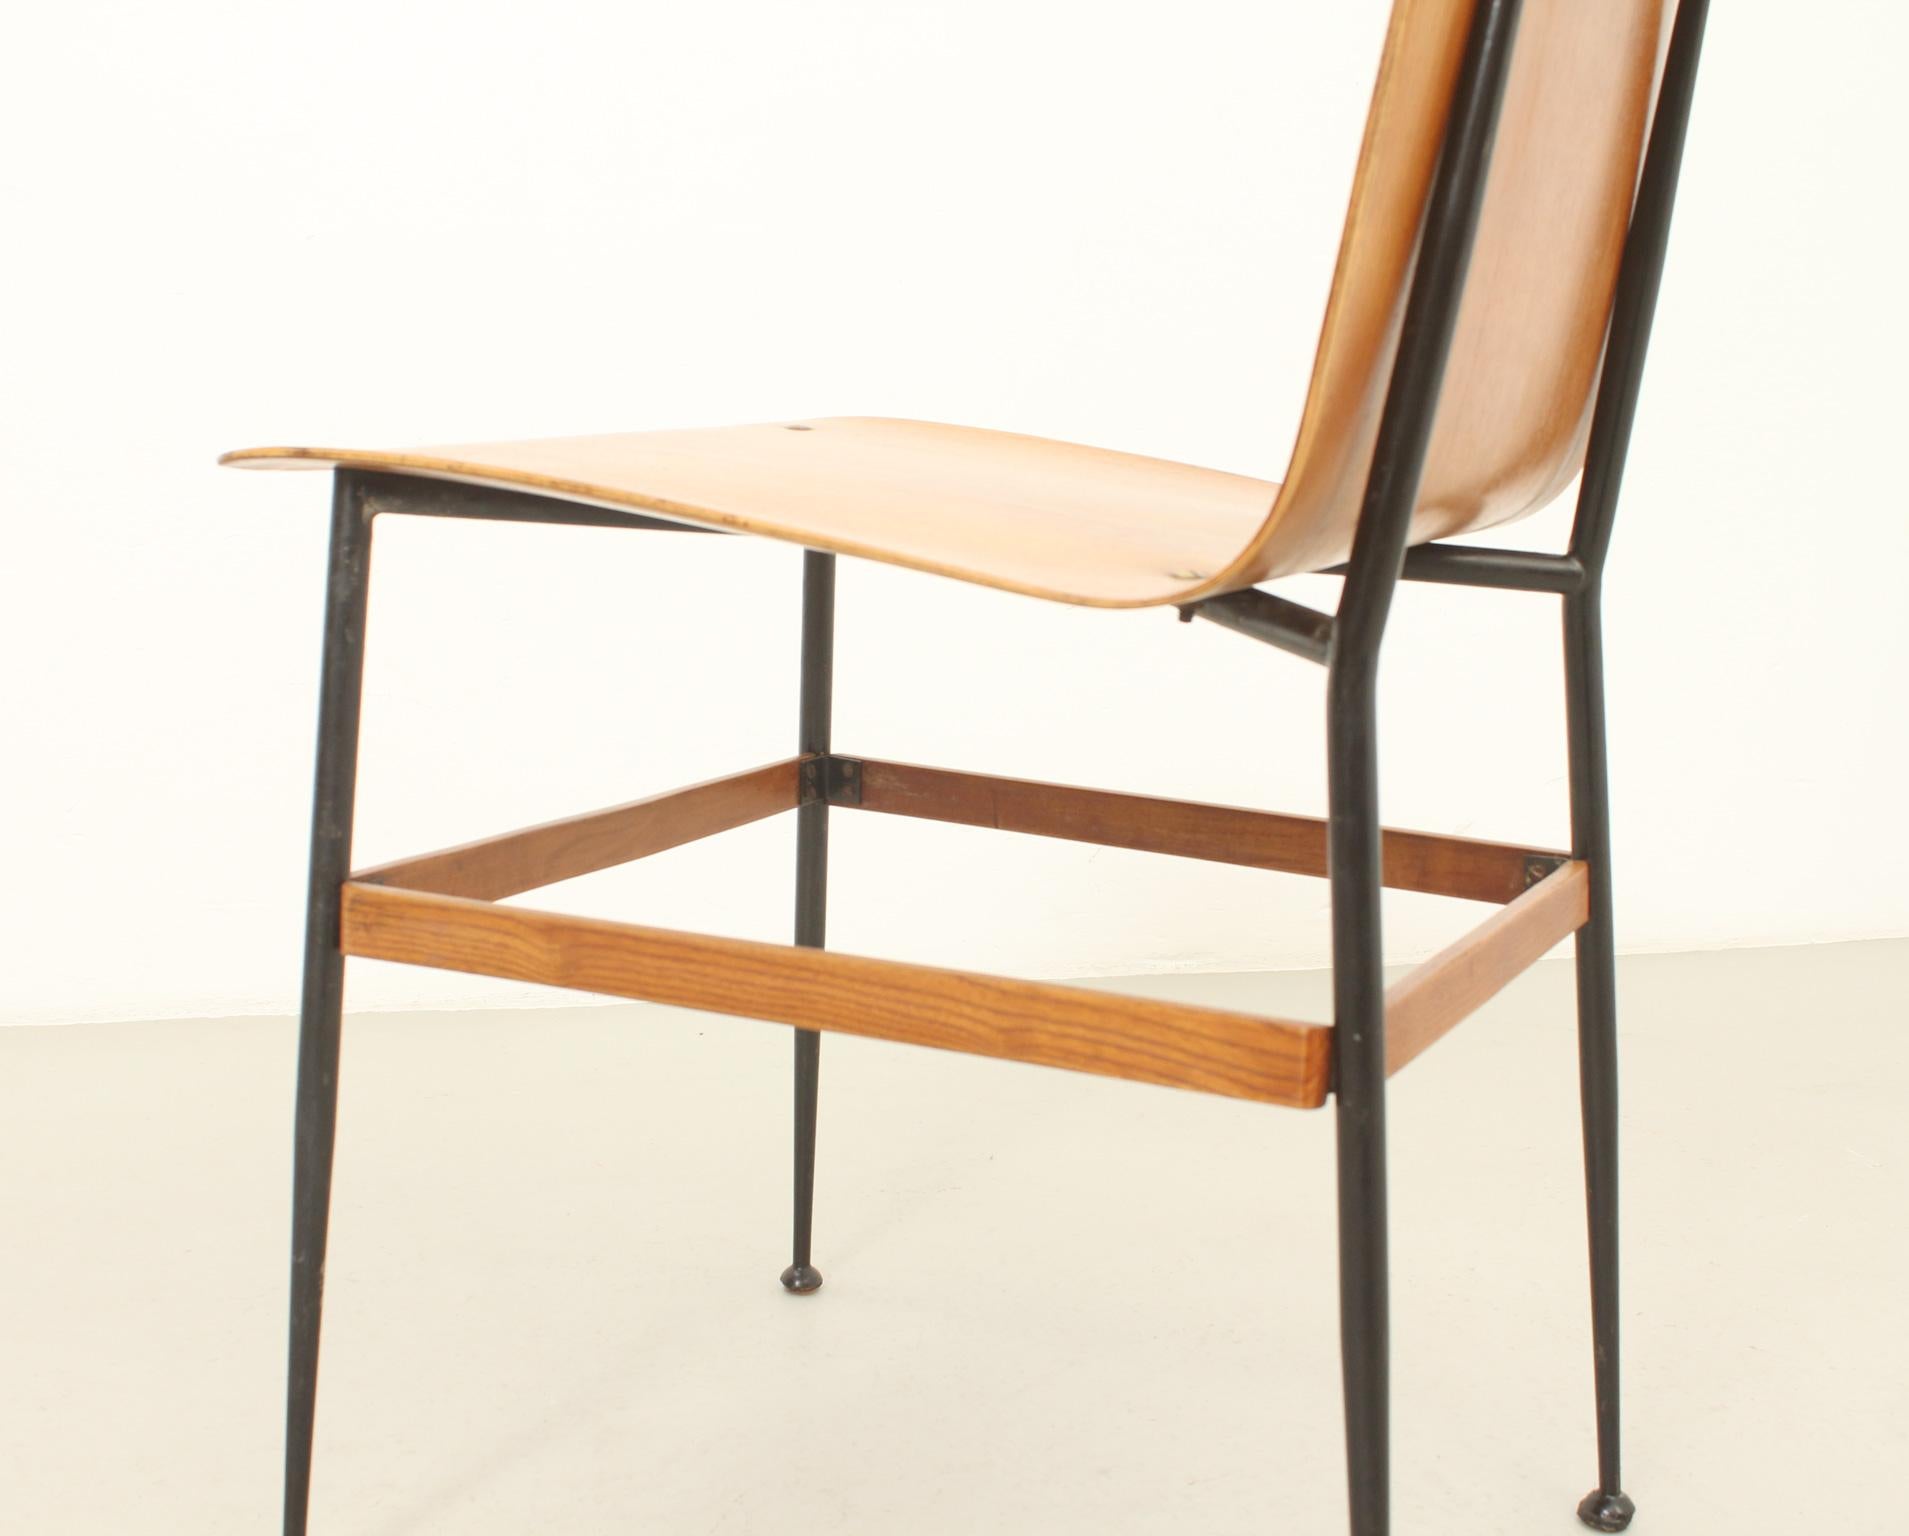 Metal Plywood Dining Chairs by Carlo Ratti, Italy, 1950s For Sale